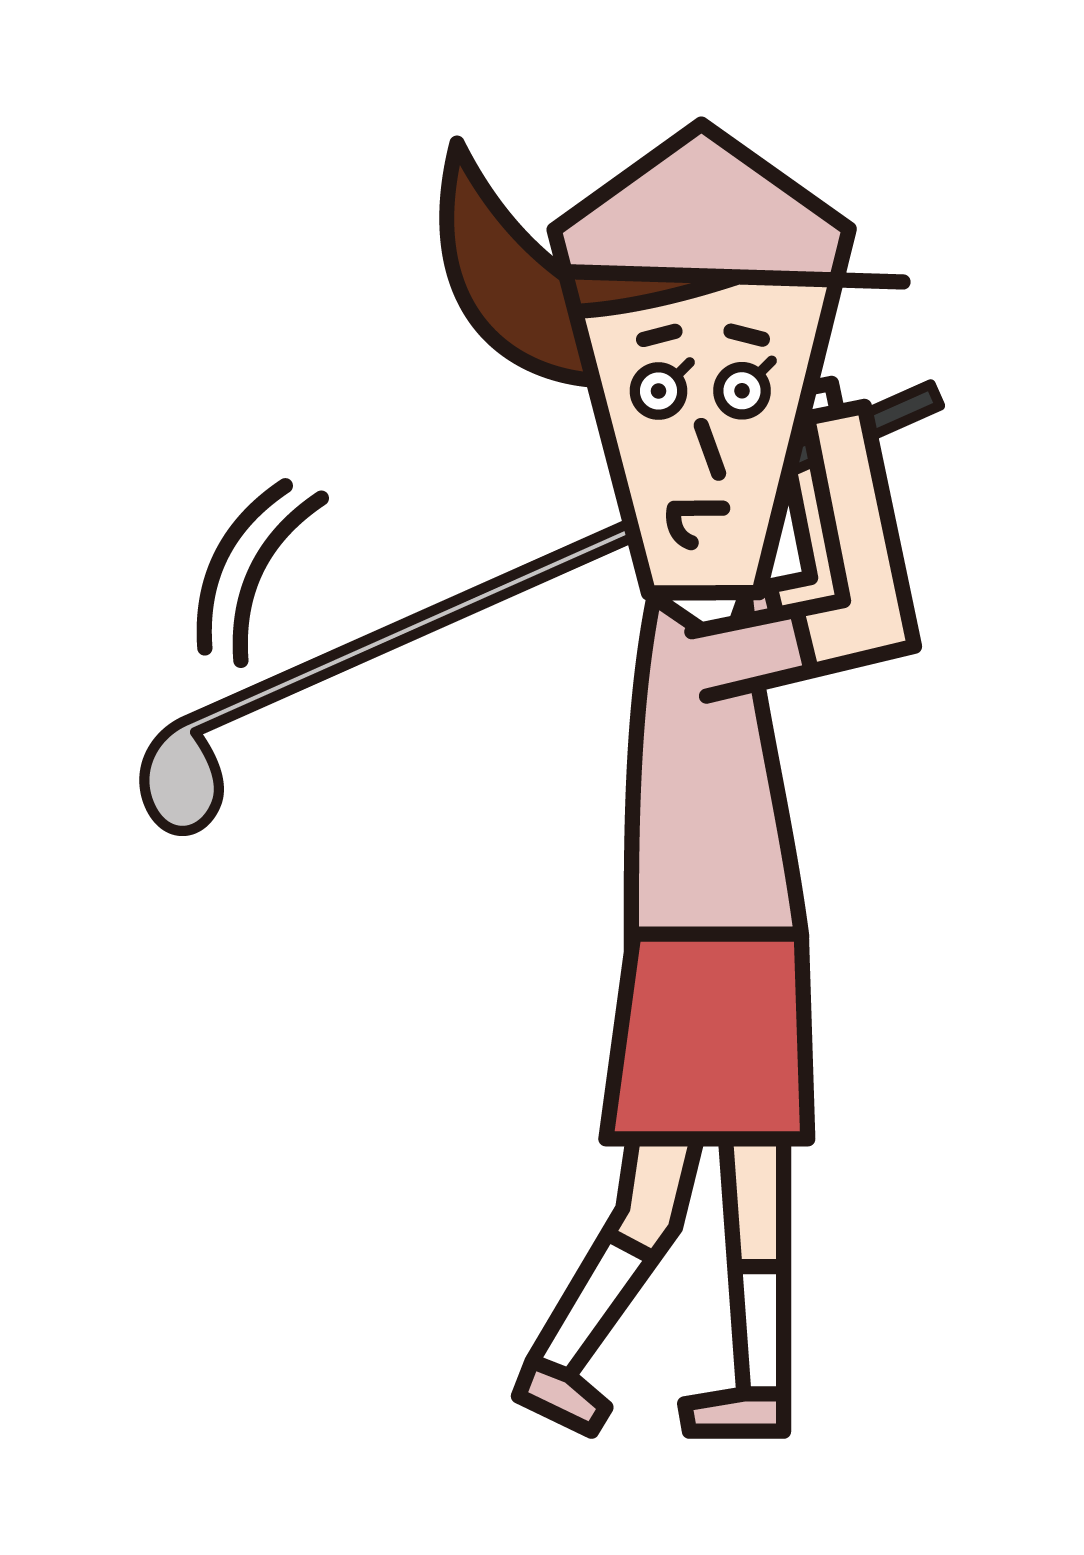 Illustration of a person pretending to play golf (female)